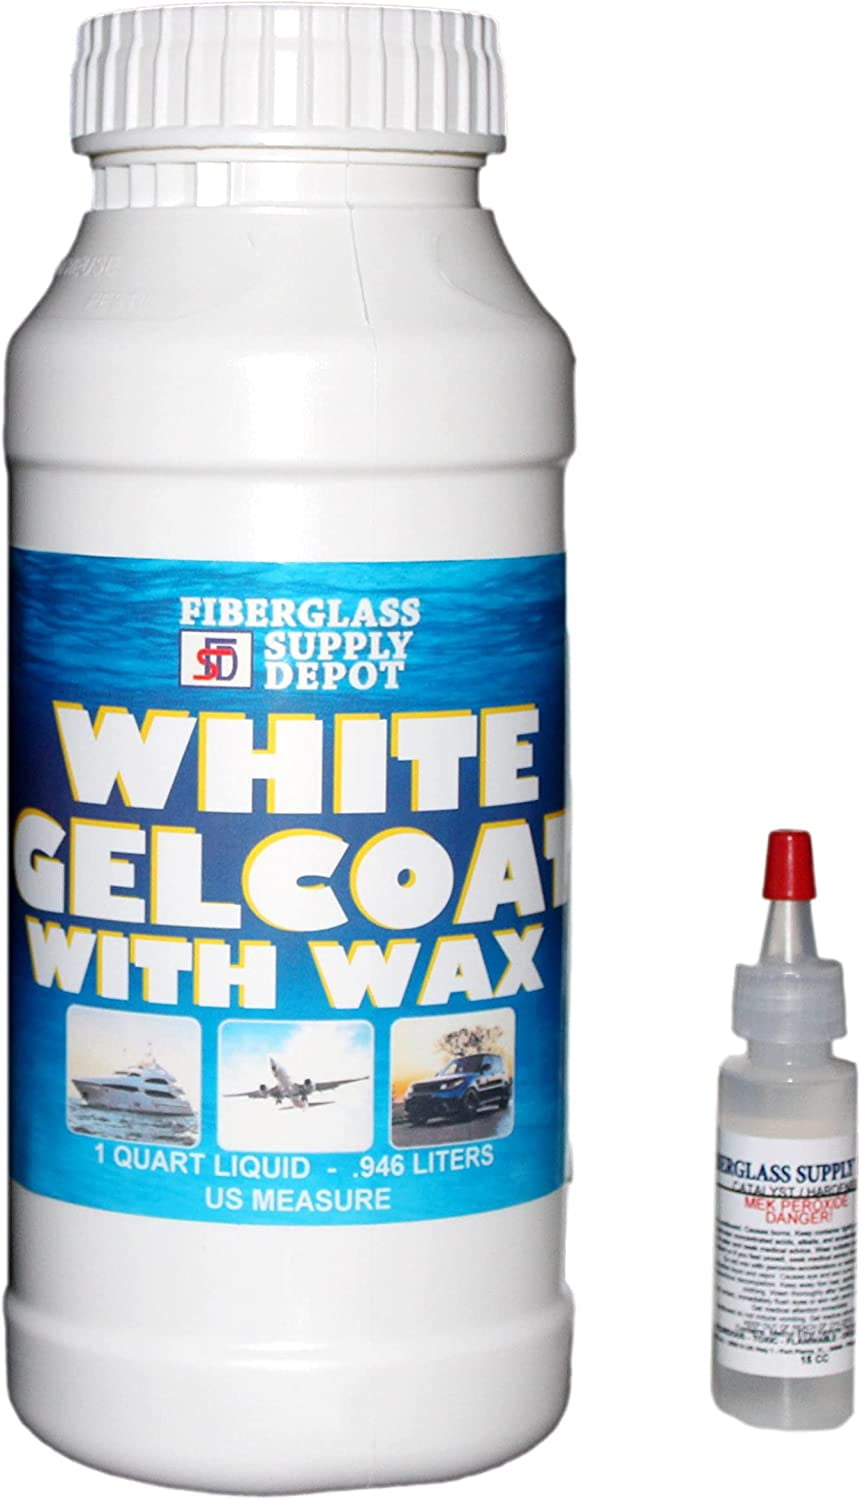 TotalBoat-14409 Marine Gelcoat for Boat Building, Repair and Composite  Coatings (White, Quart with Wax) Quart With Wax White